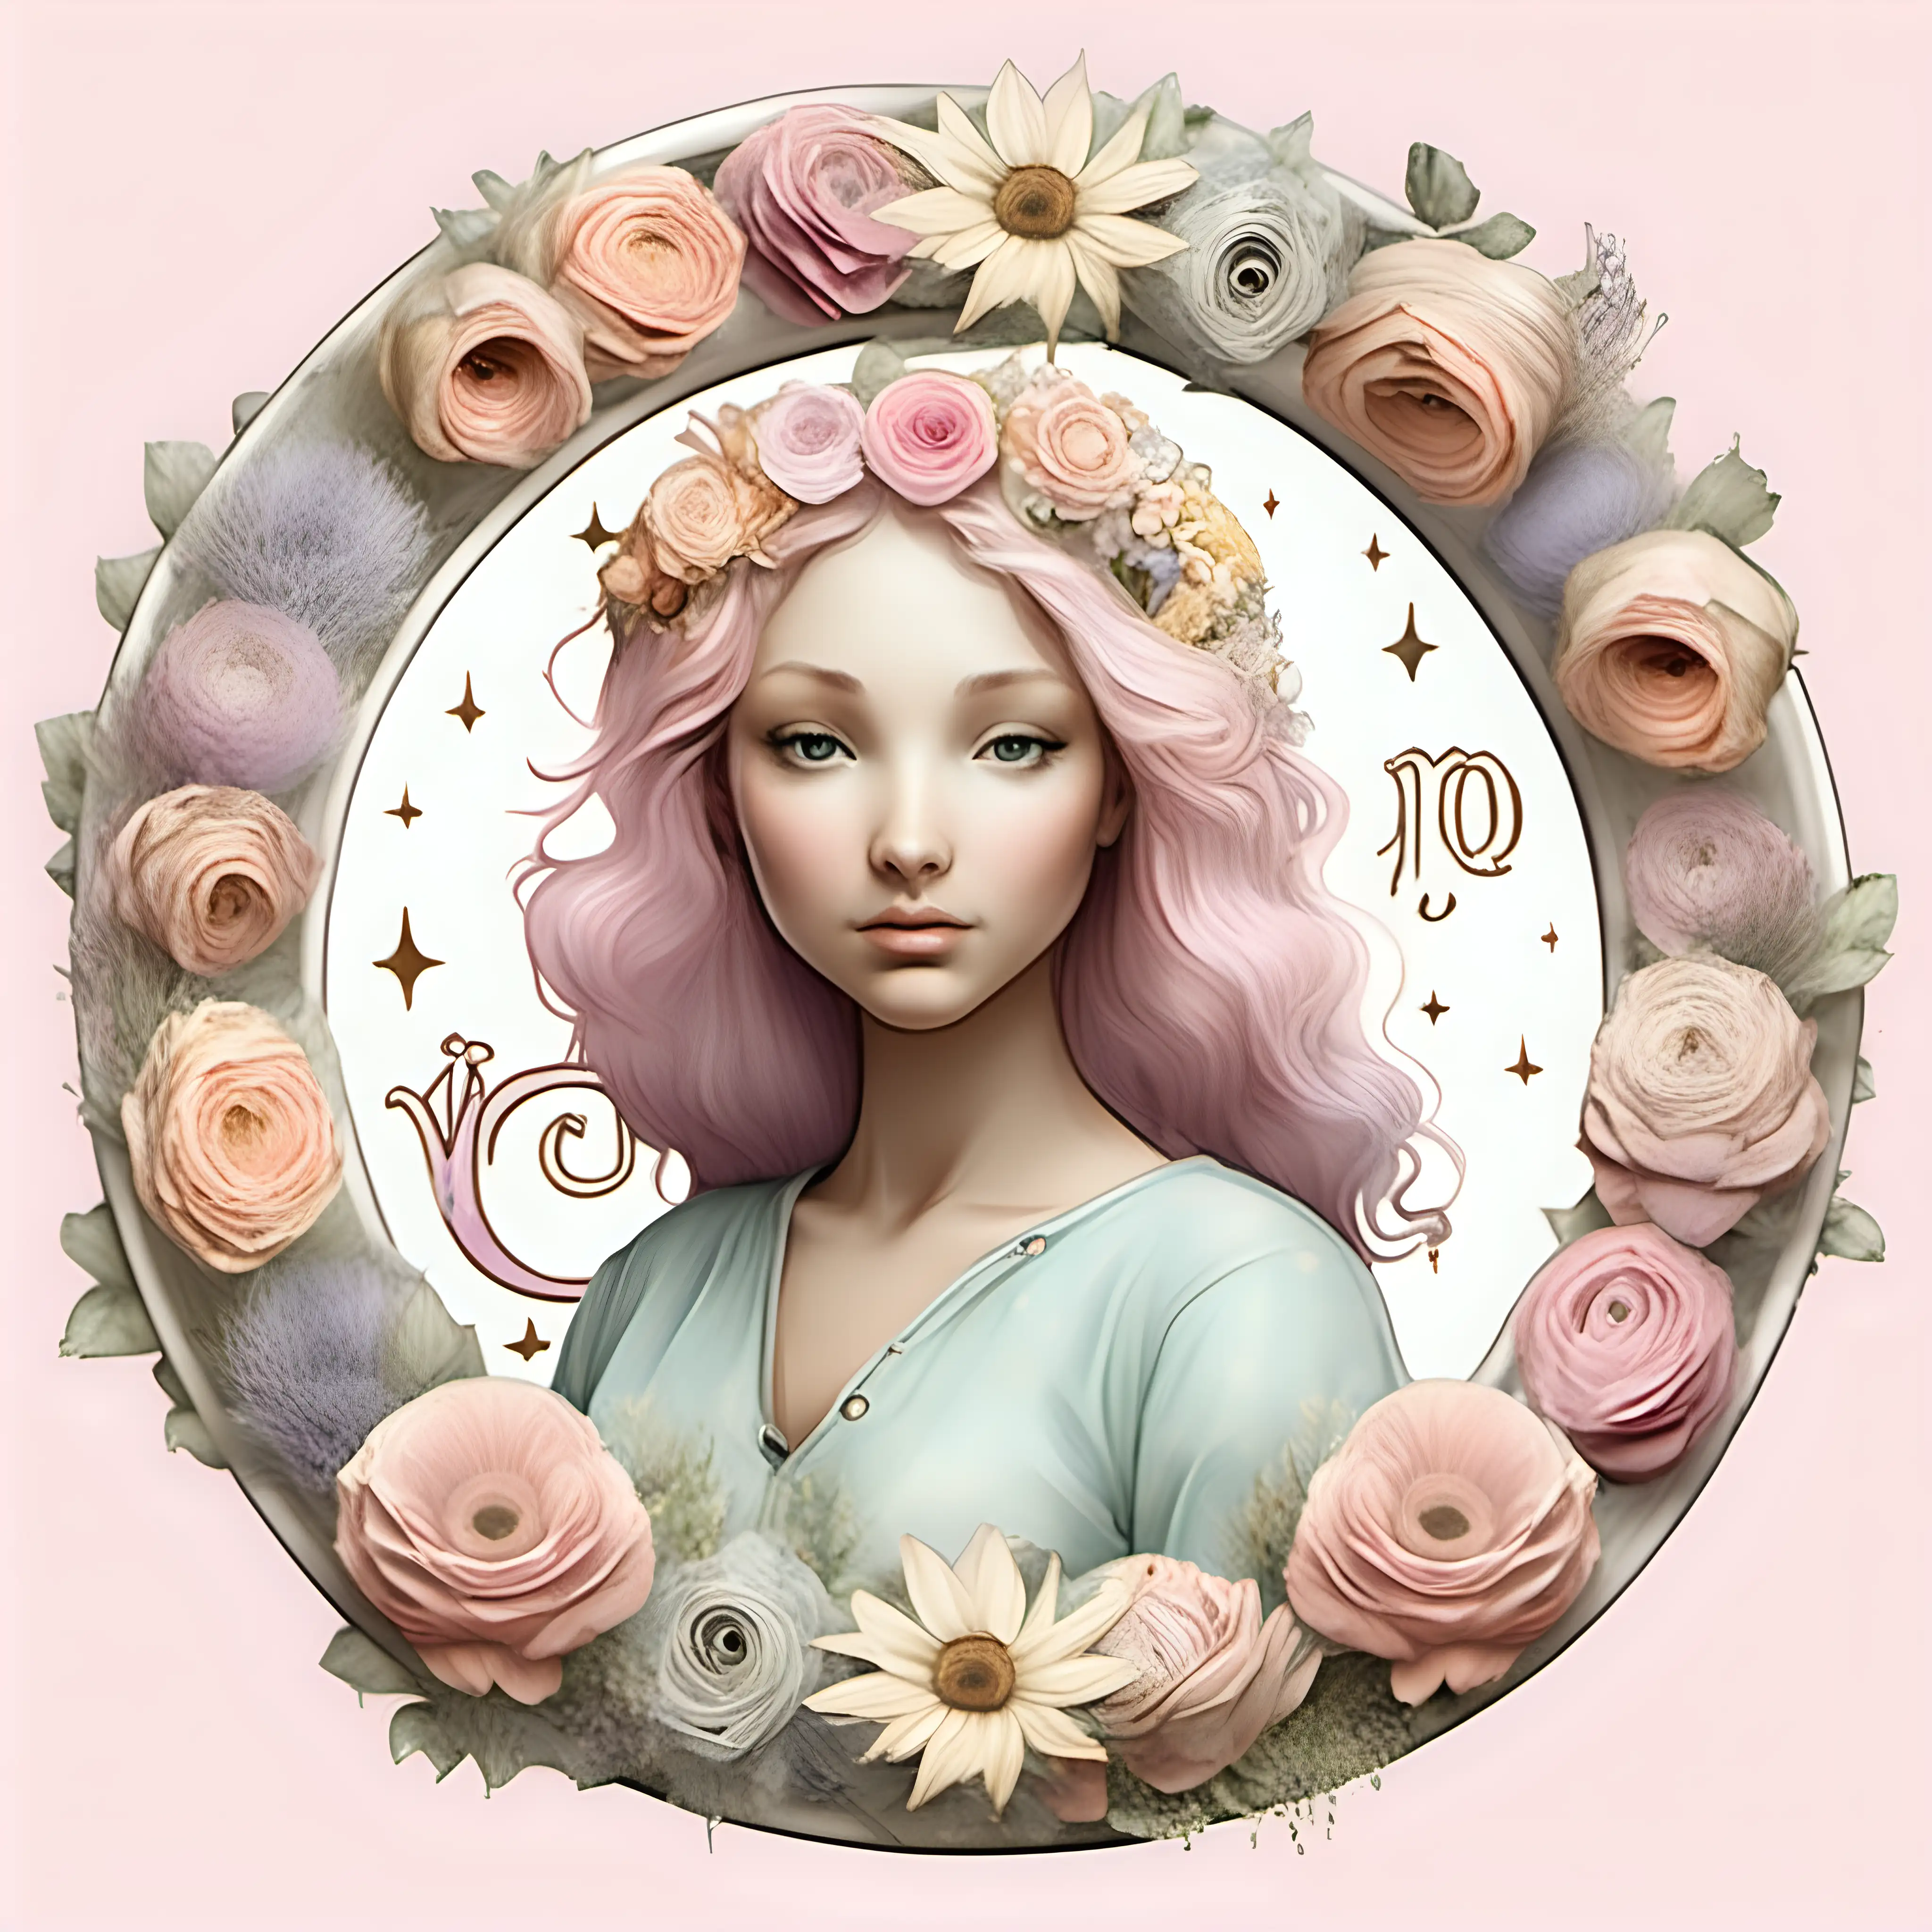 Create a pastel shabby chic  cartoon image of the Virgo zodiac sign, no human faces, with complimenting flowers embedded in the symbol; all of this inside of a pastel circular frame on a transparent background